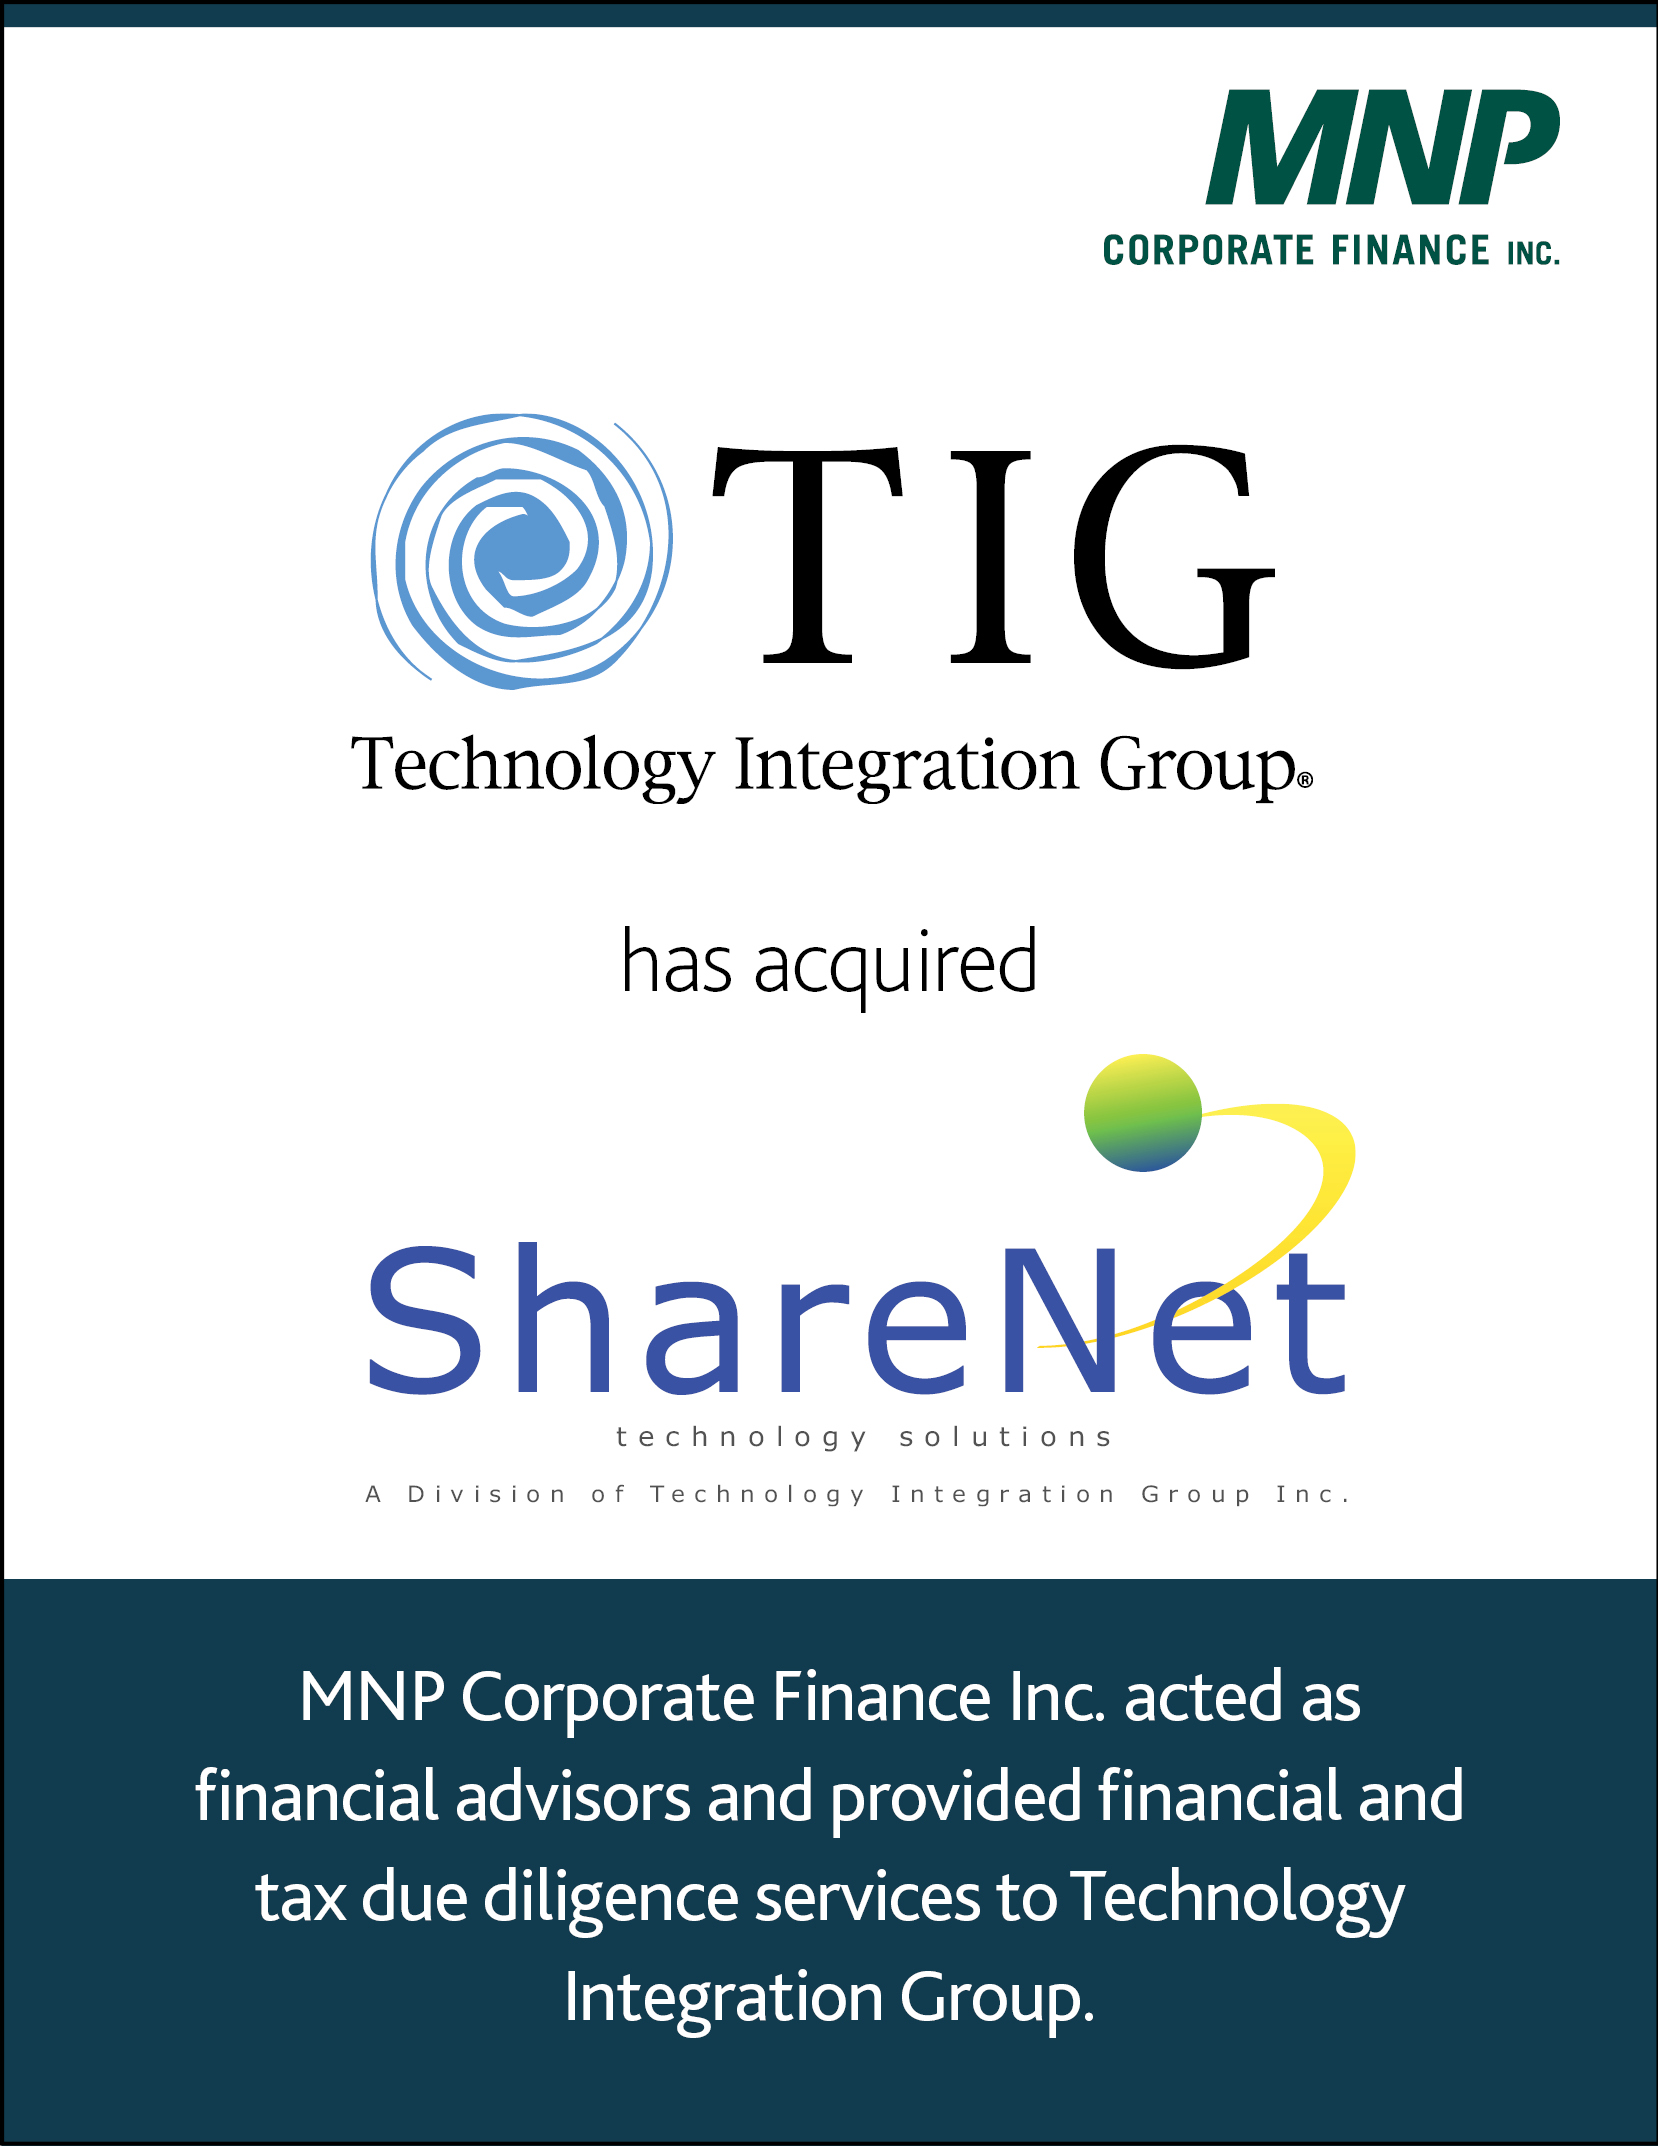 Technology Integration Group has acquired ShareNet